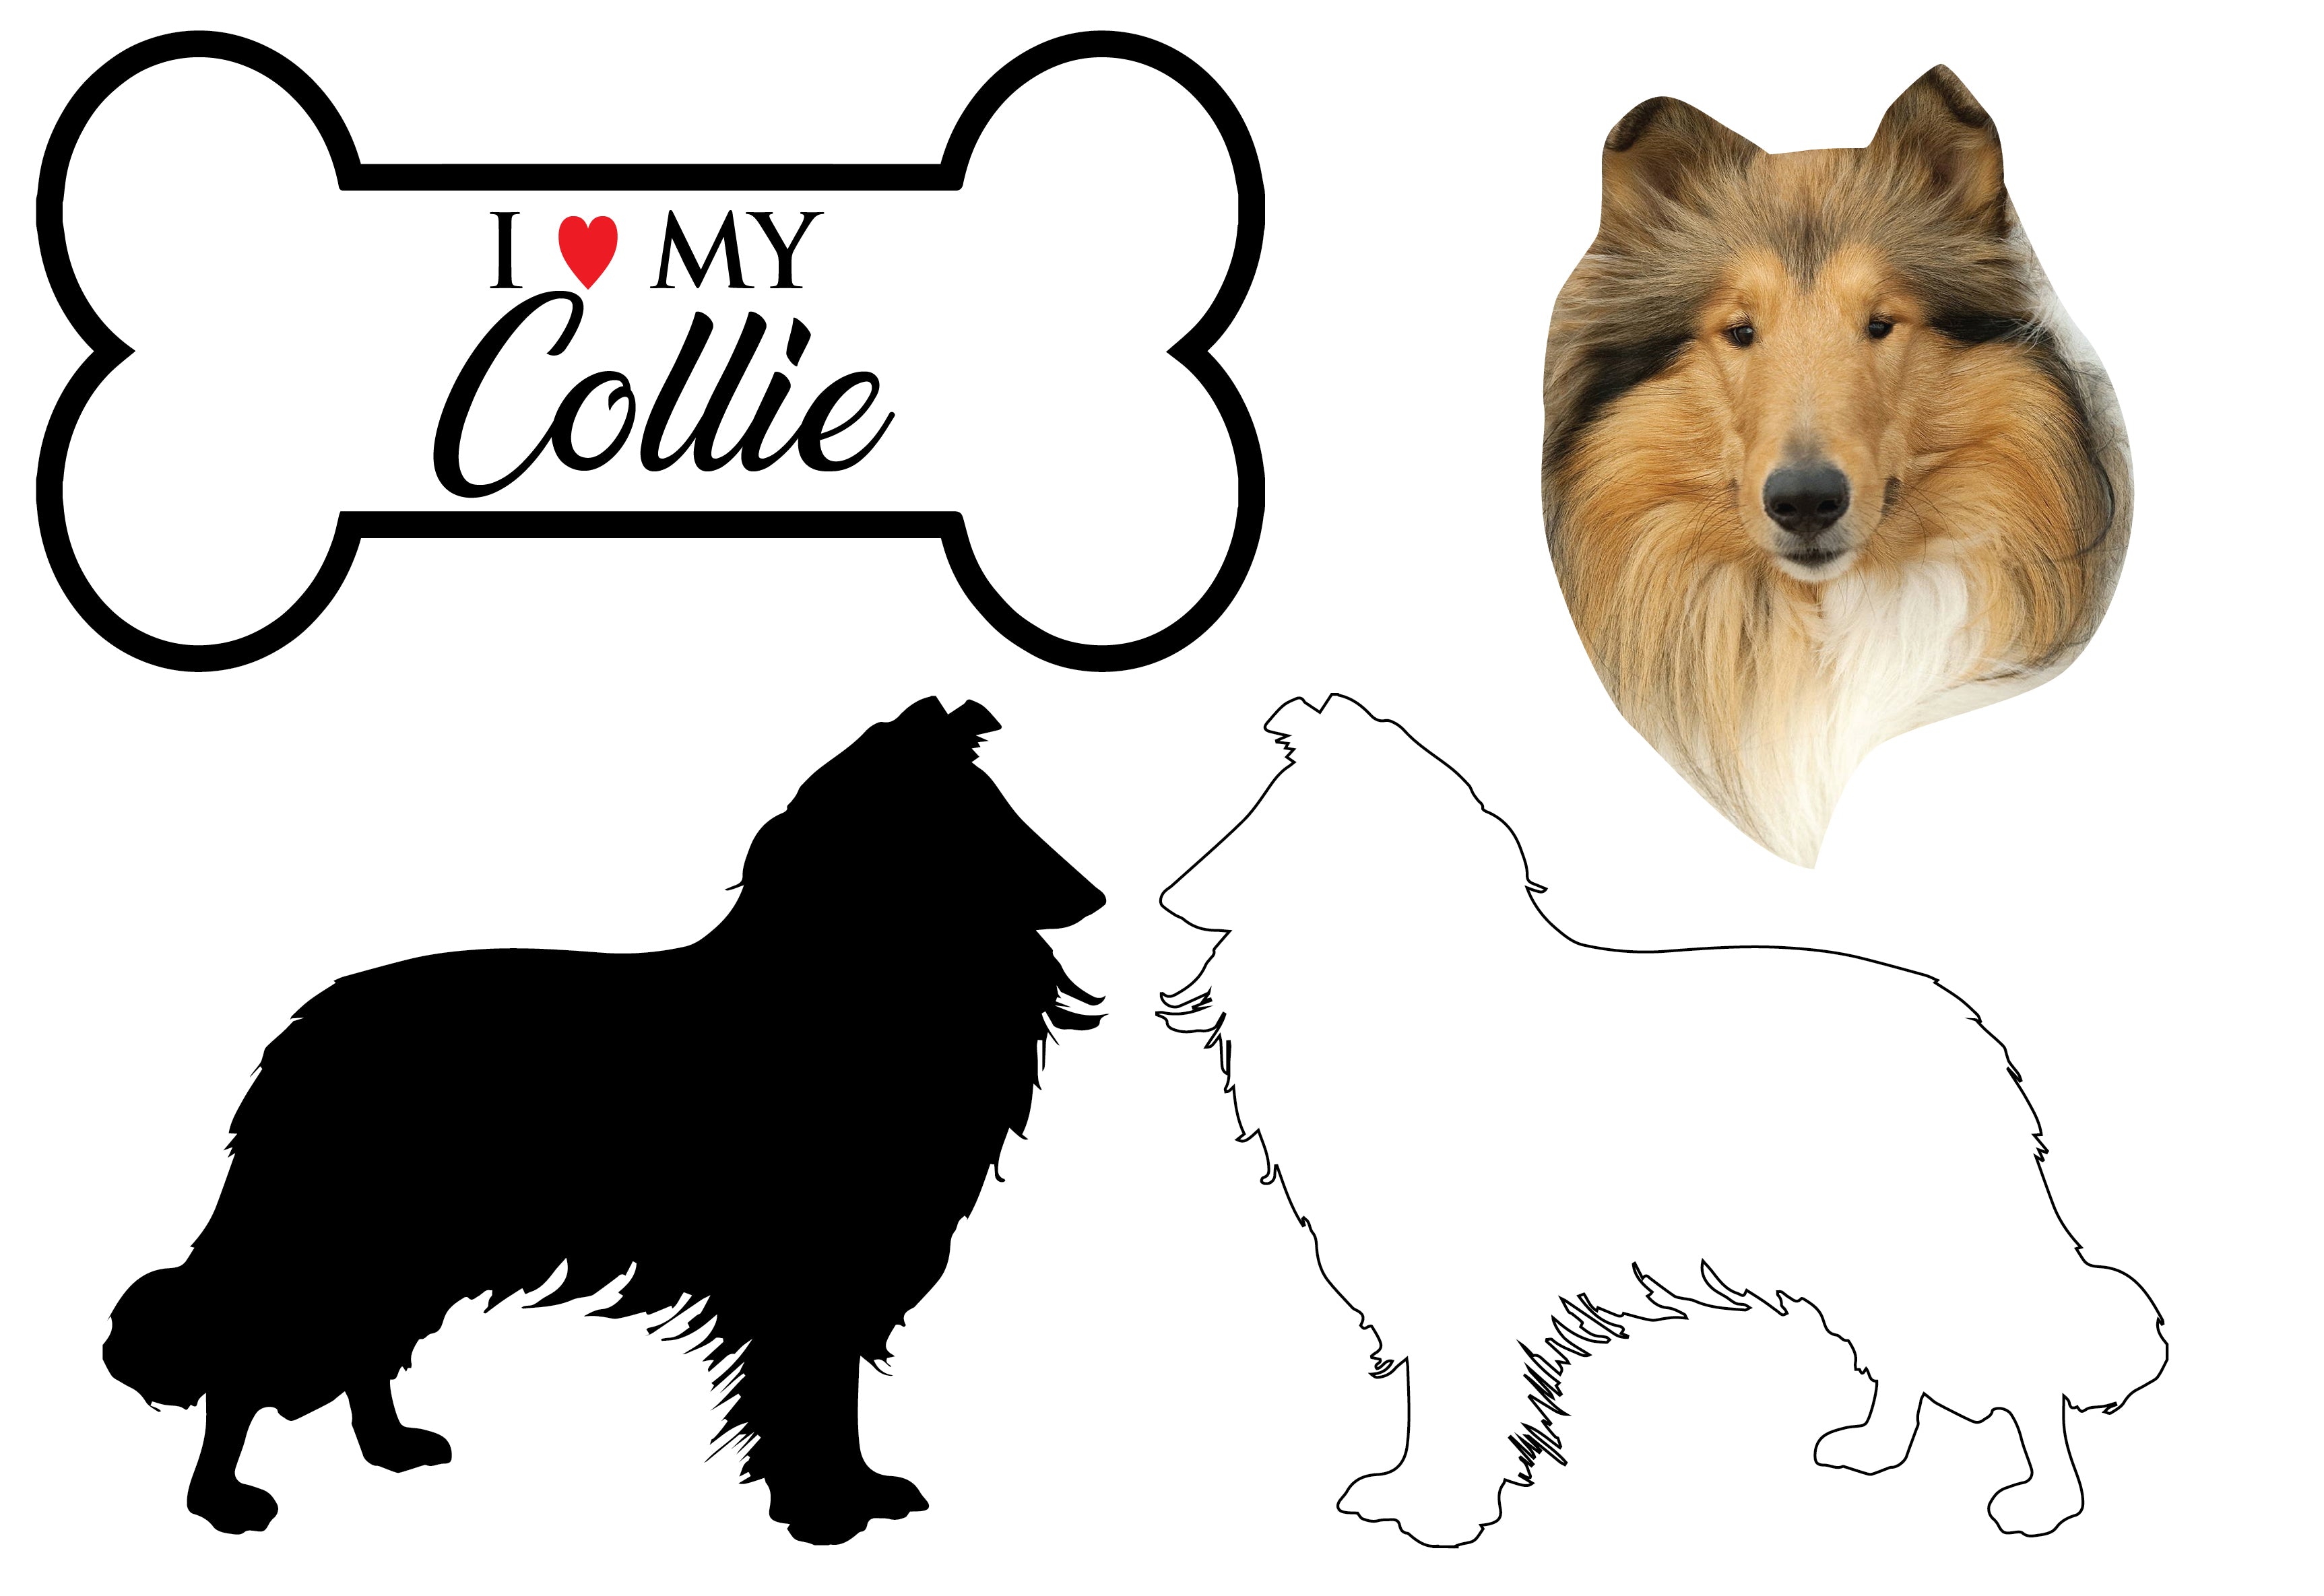 Collie - Dog Breed Decals (Set of 16) - Sizes in Description